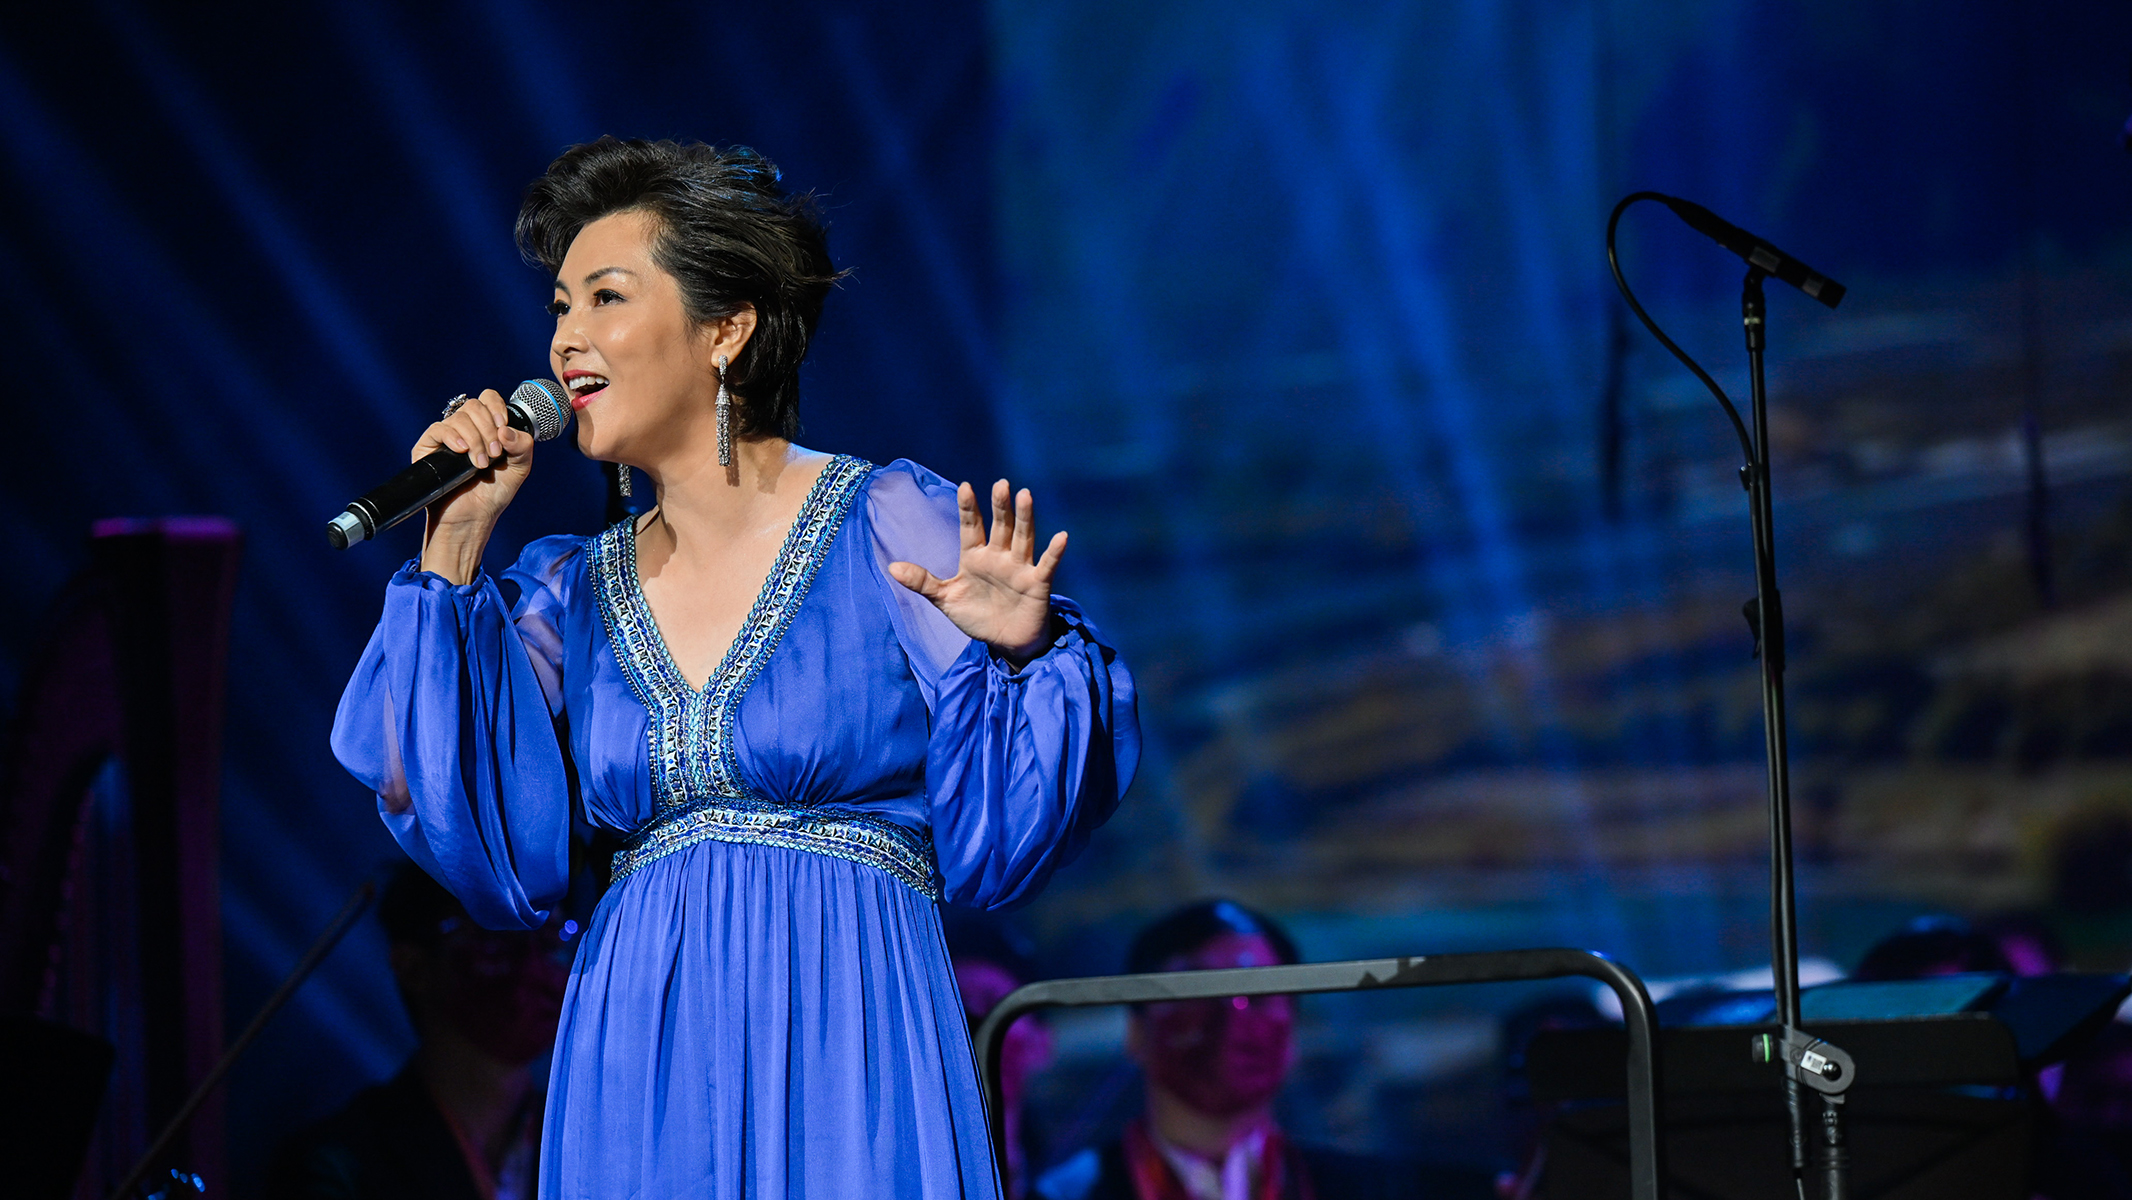 Distinguished singer Ms Sophie Chen performed two songs, including “O mio babbino caro” (Oh my dear Papa) from Gianni Schicchi by Puccini.